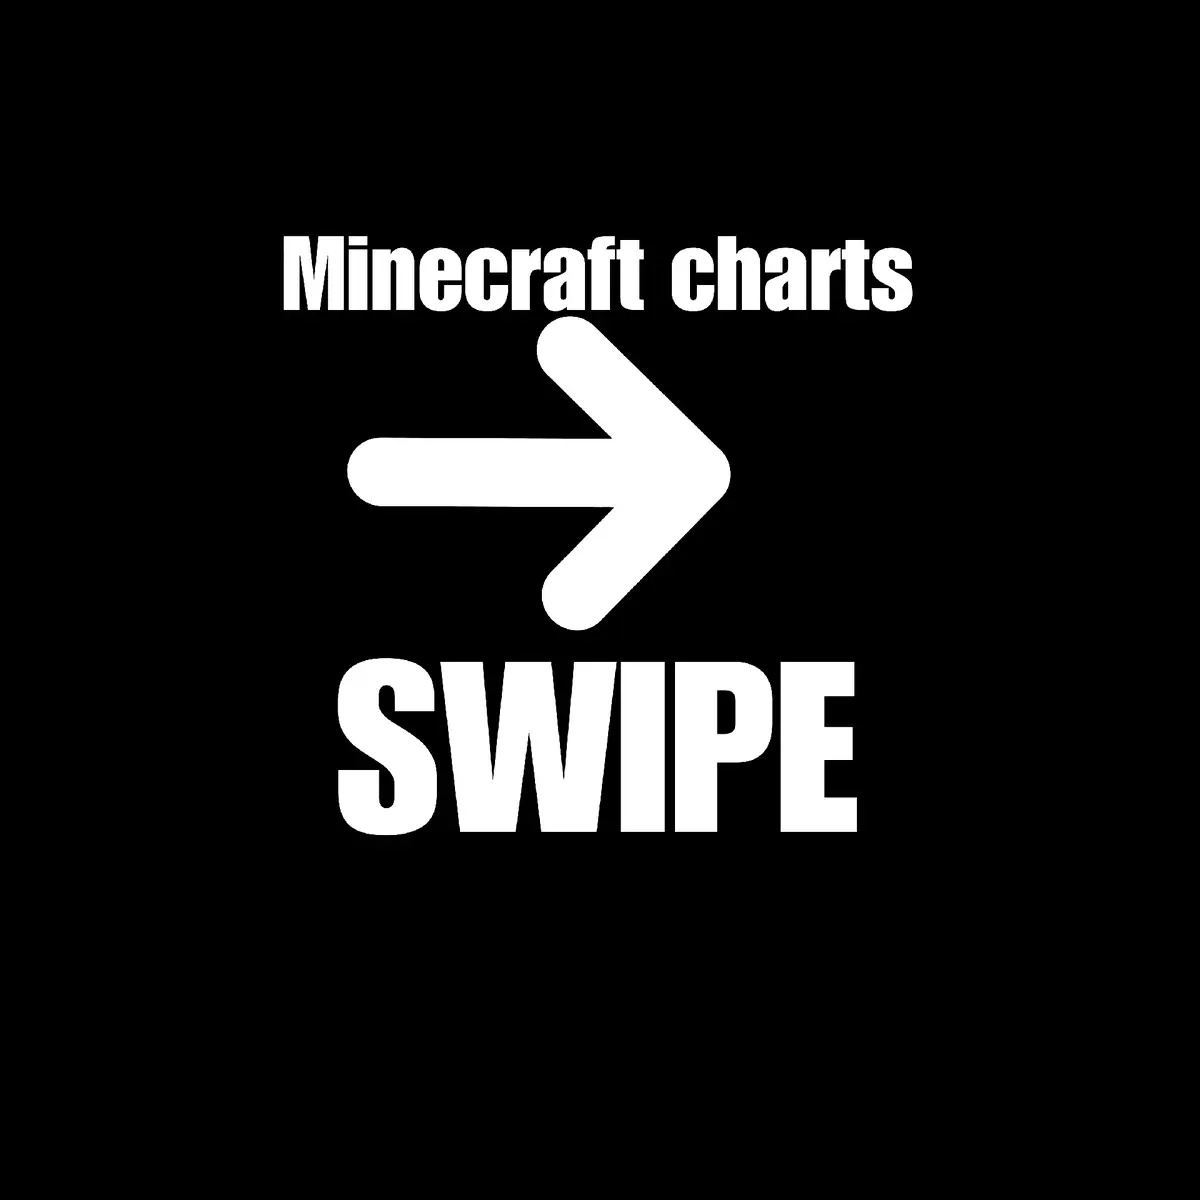 #Minecraft #minecraftbuilds #minecraftjava #minecraftbedrock  #minecraftbuild Minecraft charts that may be useful the next time you play.